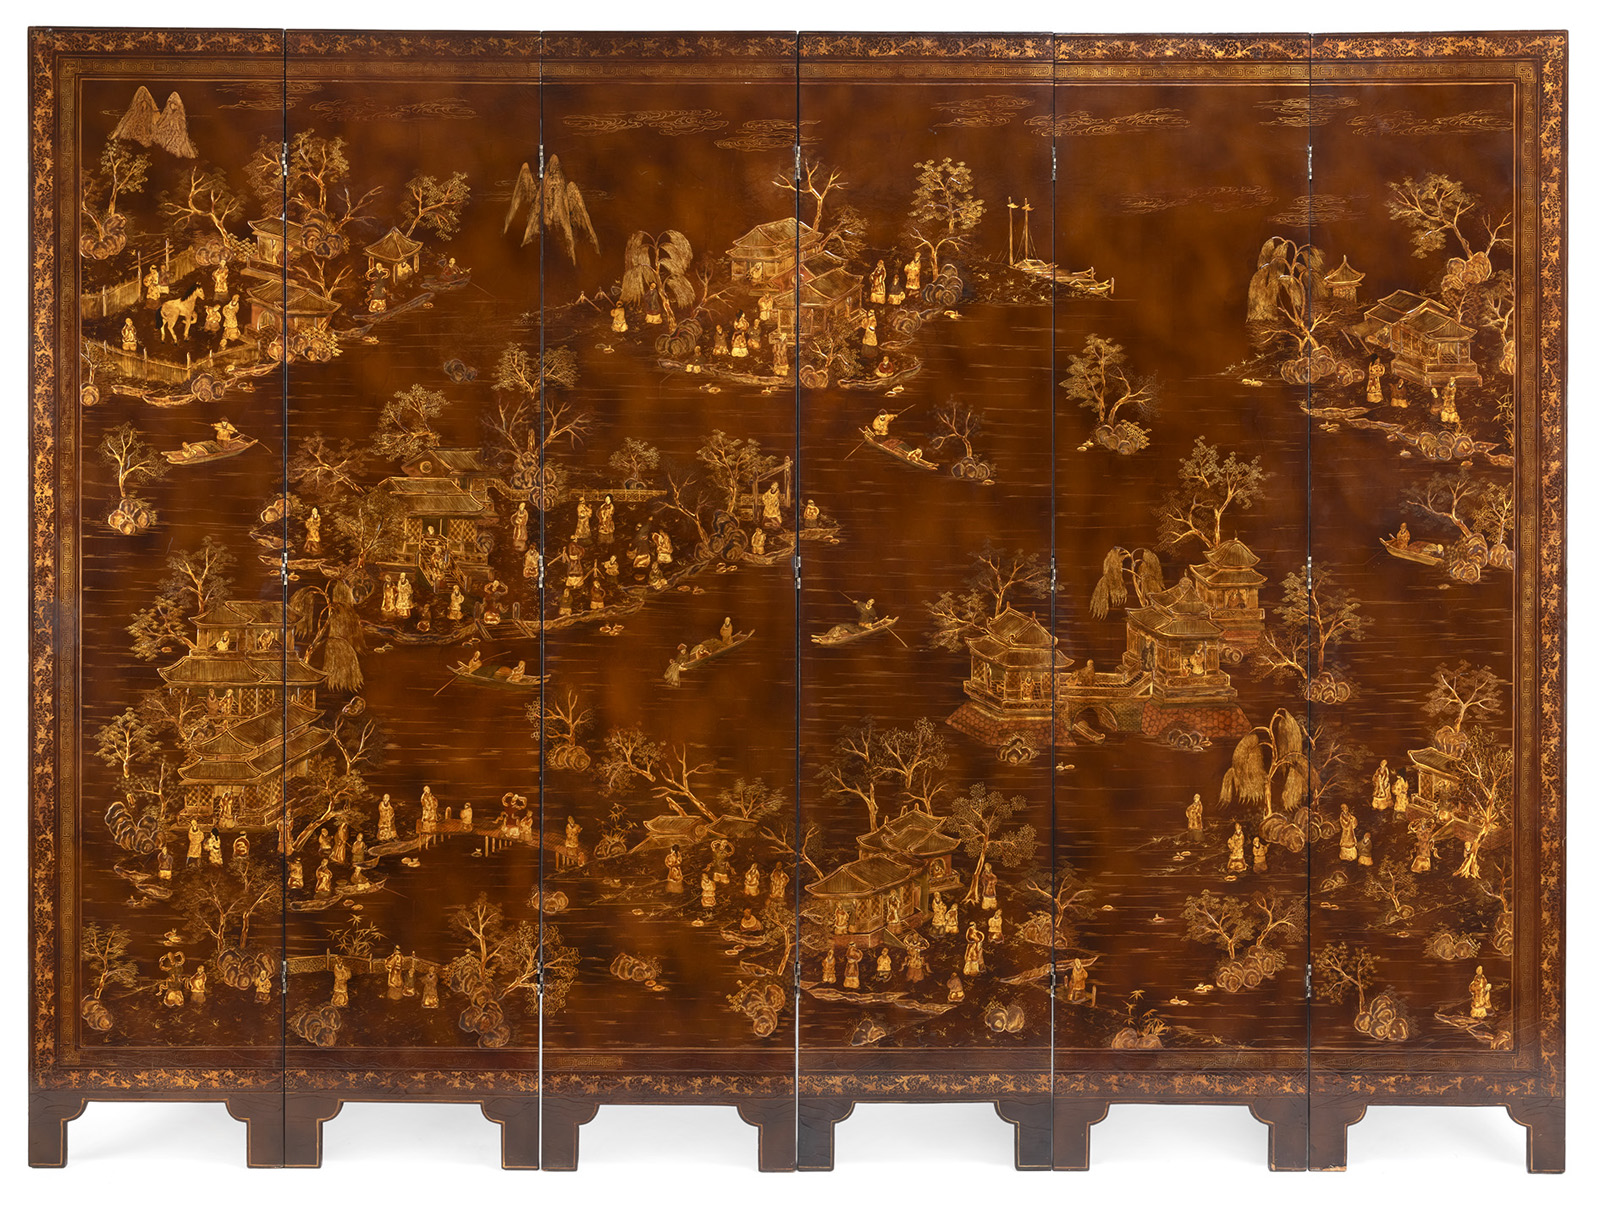 A SIX-PART GILT-LACQUERED FIGURAL SCENES IN A RIVER LANDSCAPE FOLDING SCREEN